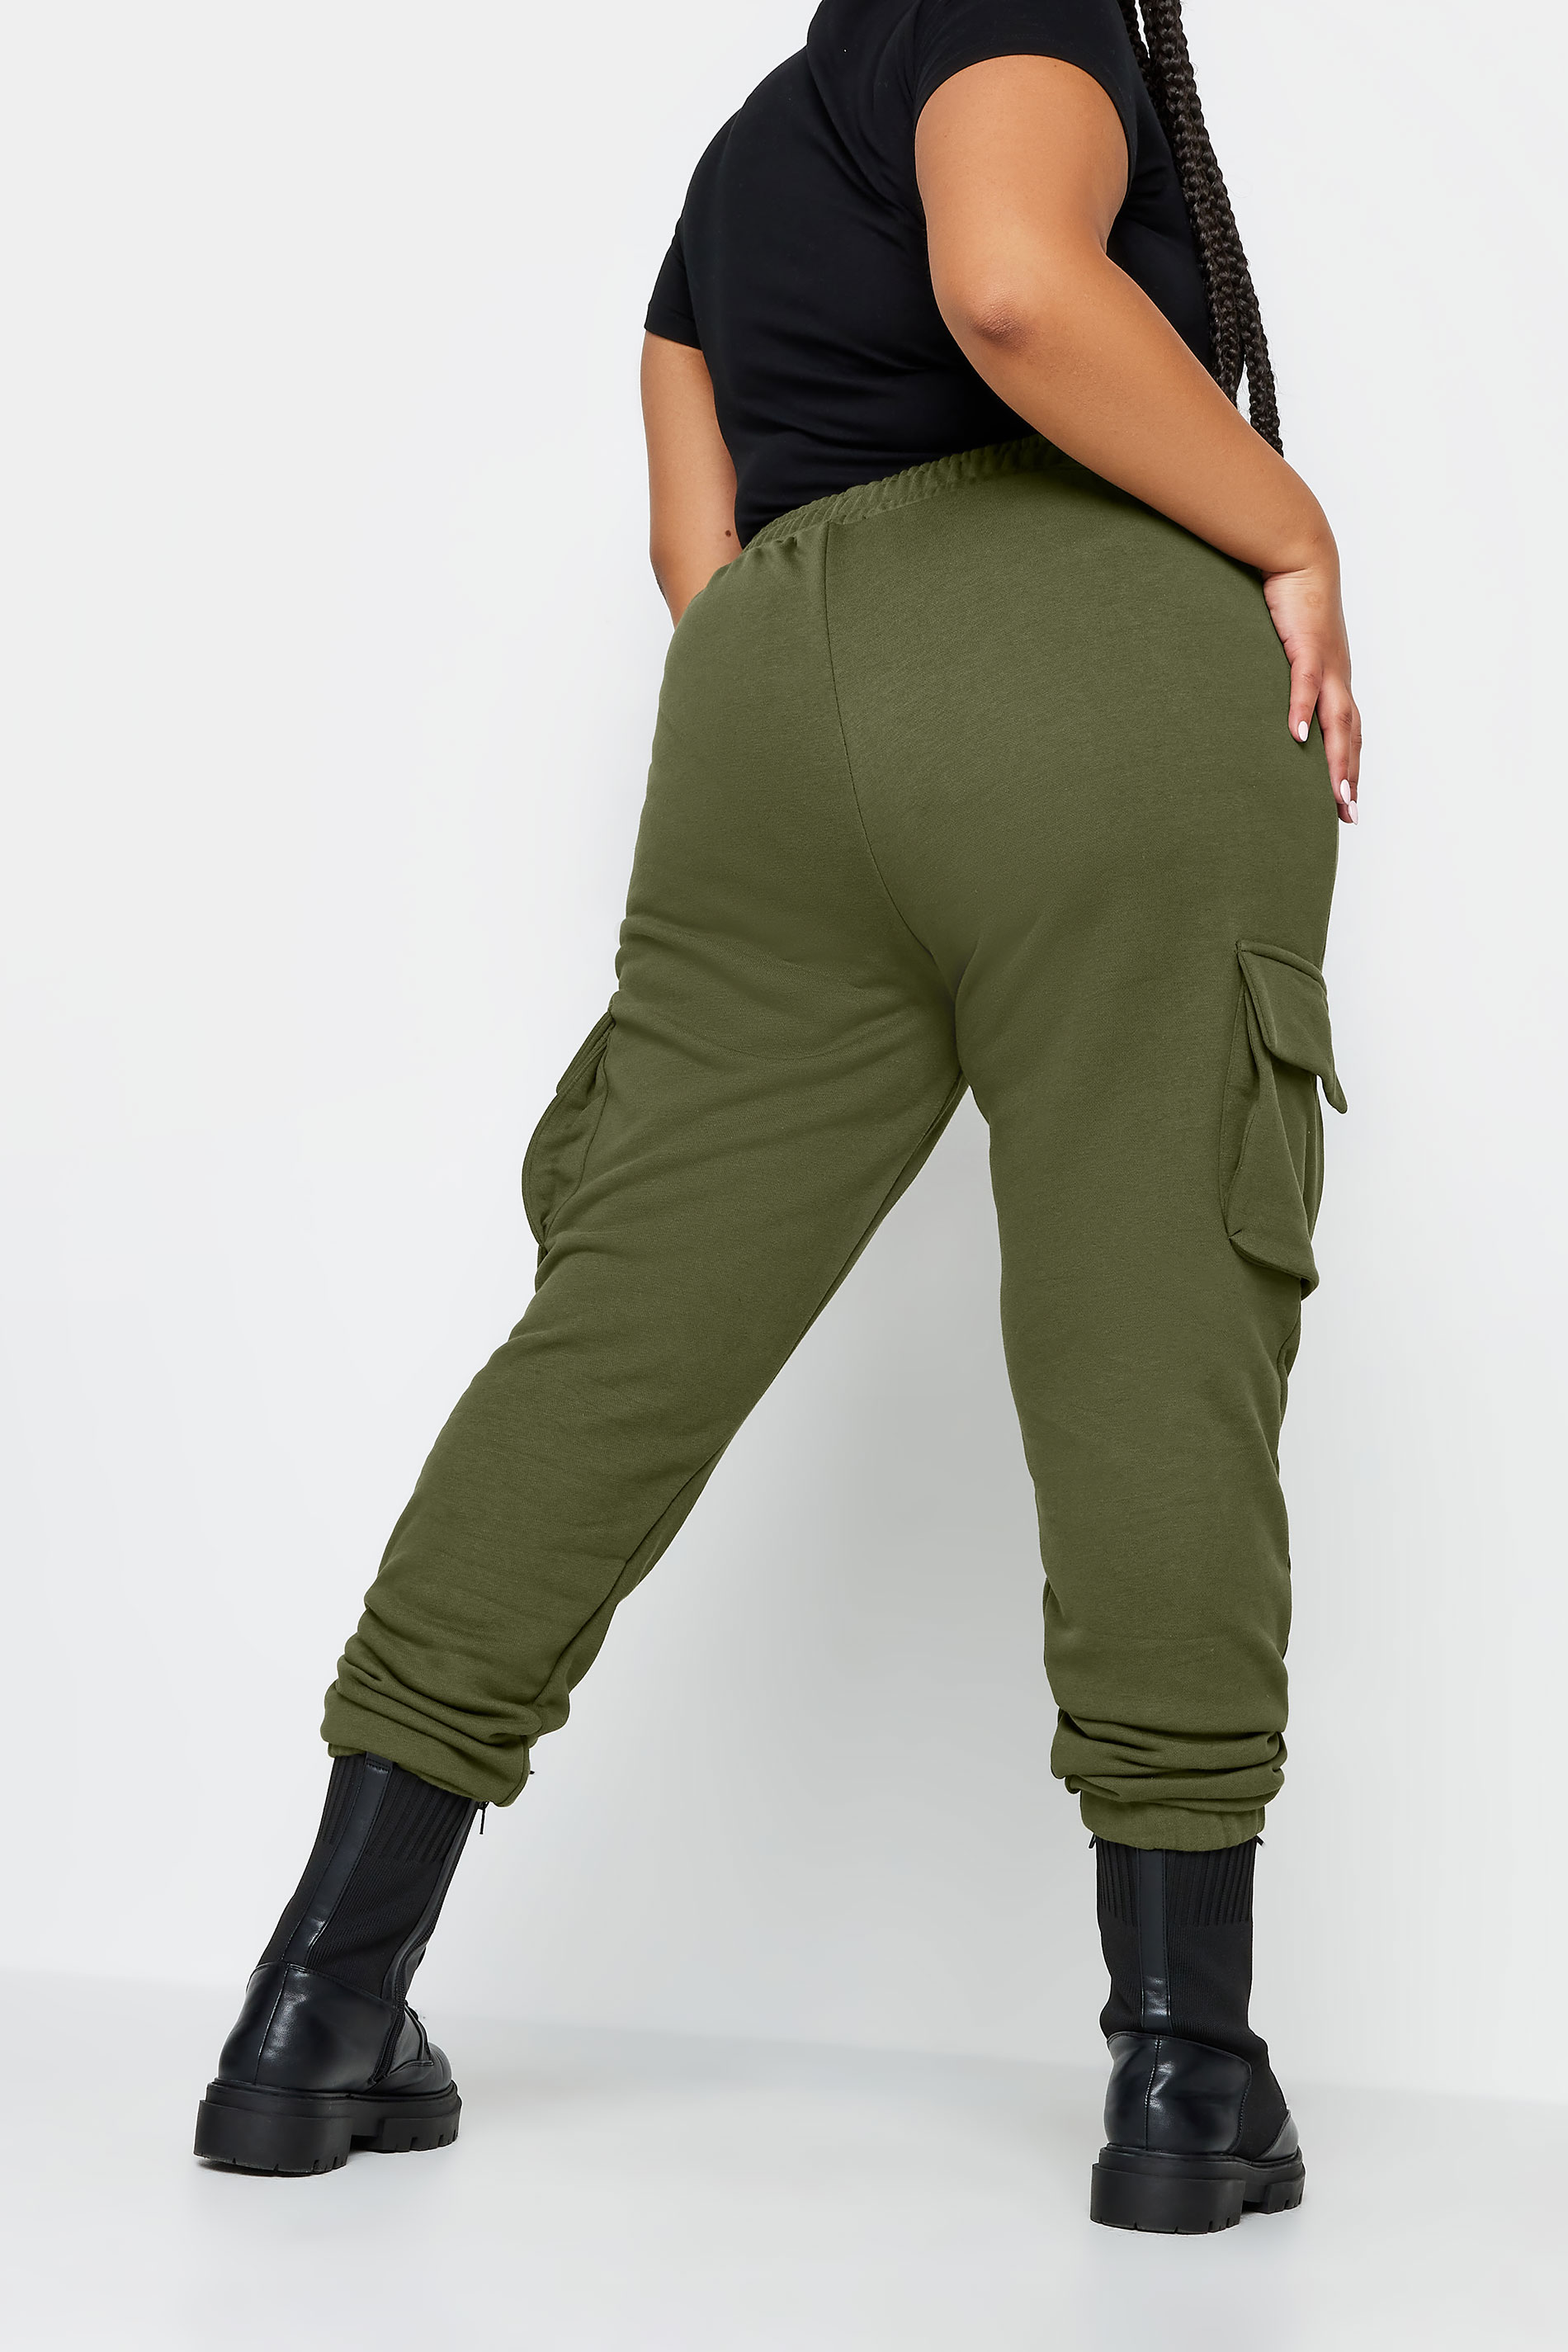 YOURS Plus Size Khaki Green Cuffed Cargo Joggers | Yours Clothing 3